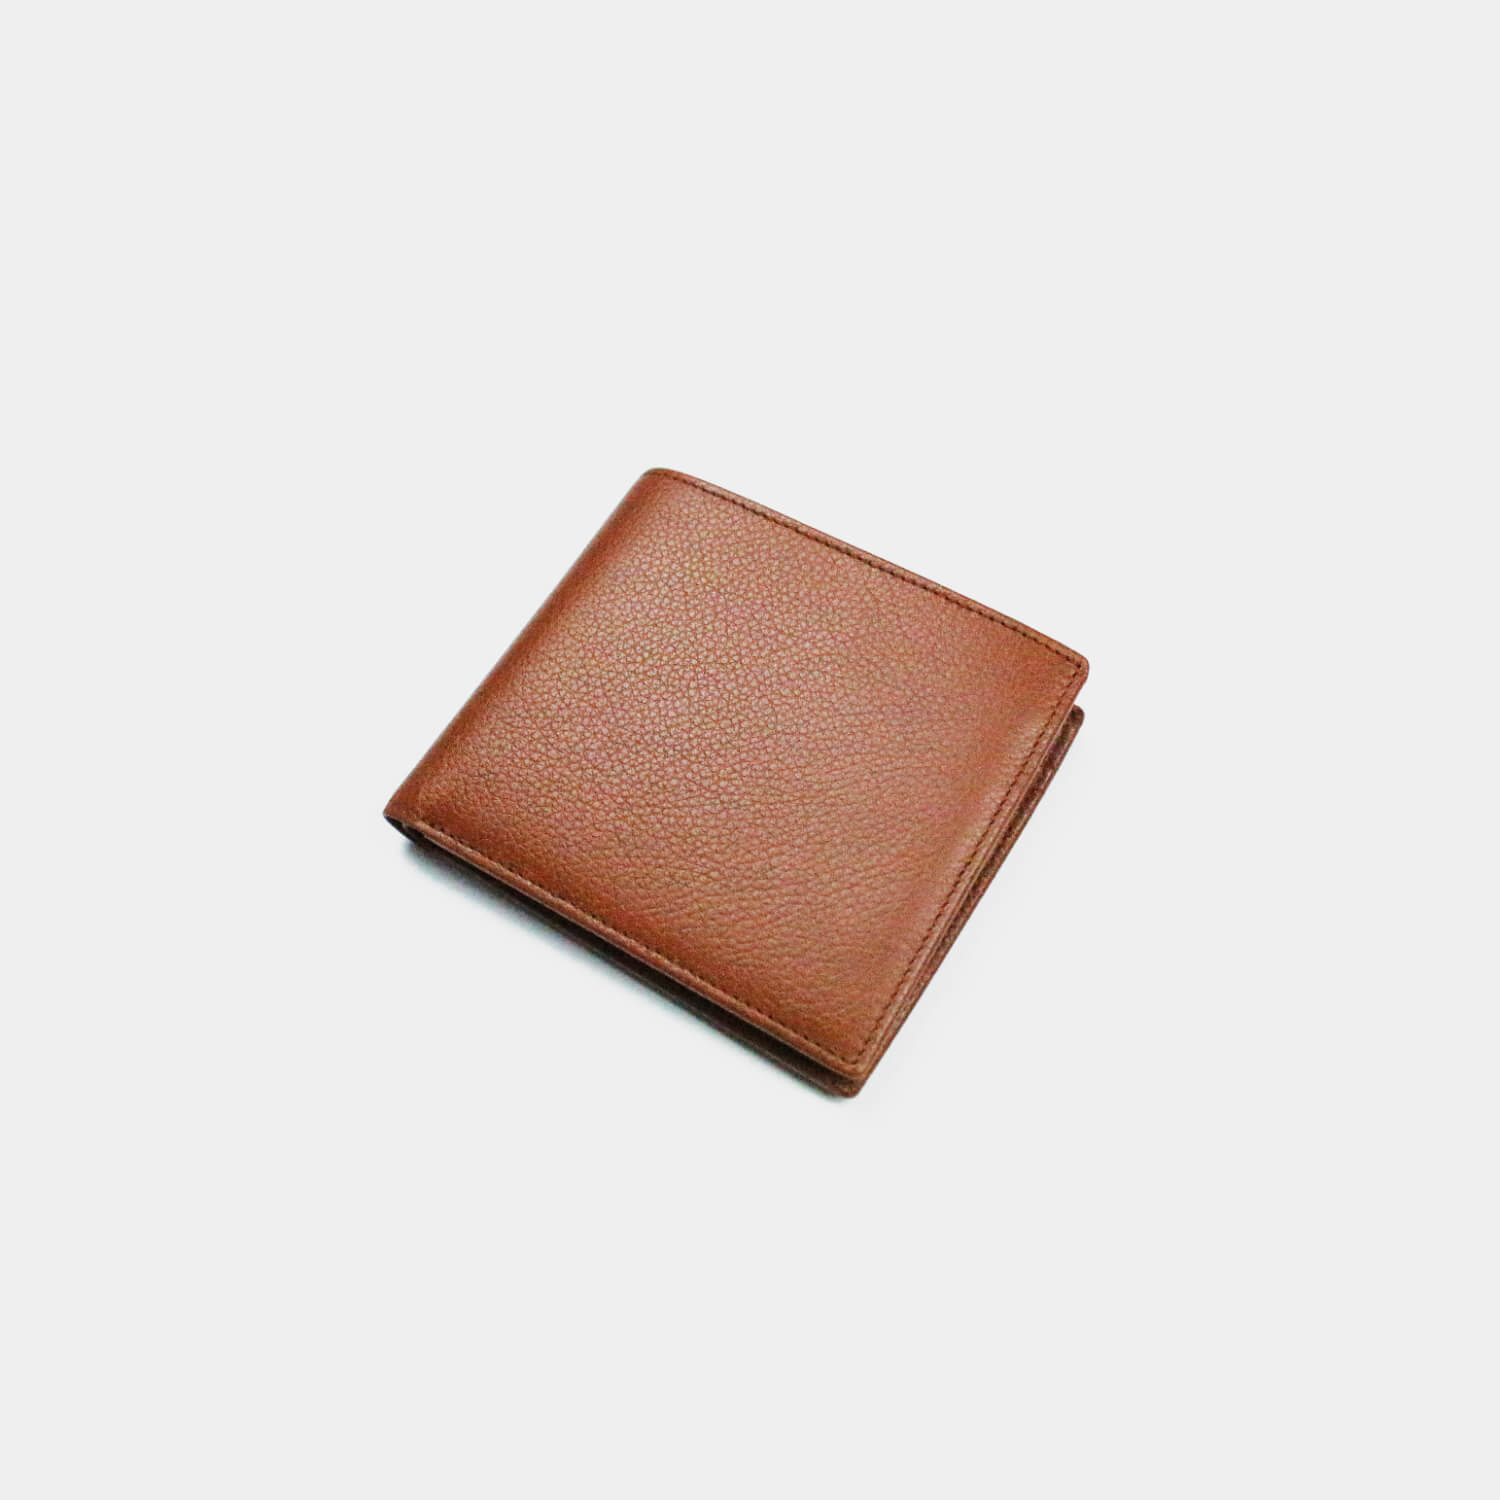 Fine grain leather wallet with 4 card slots, 2 note sections and a coin purse